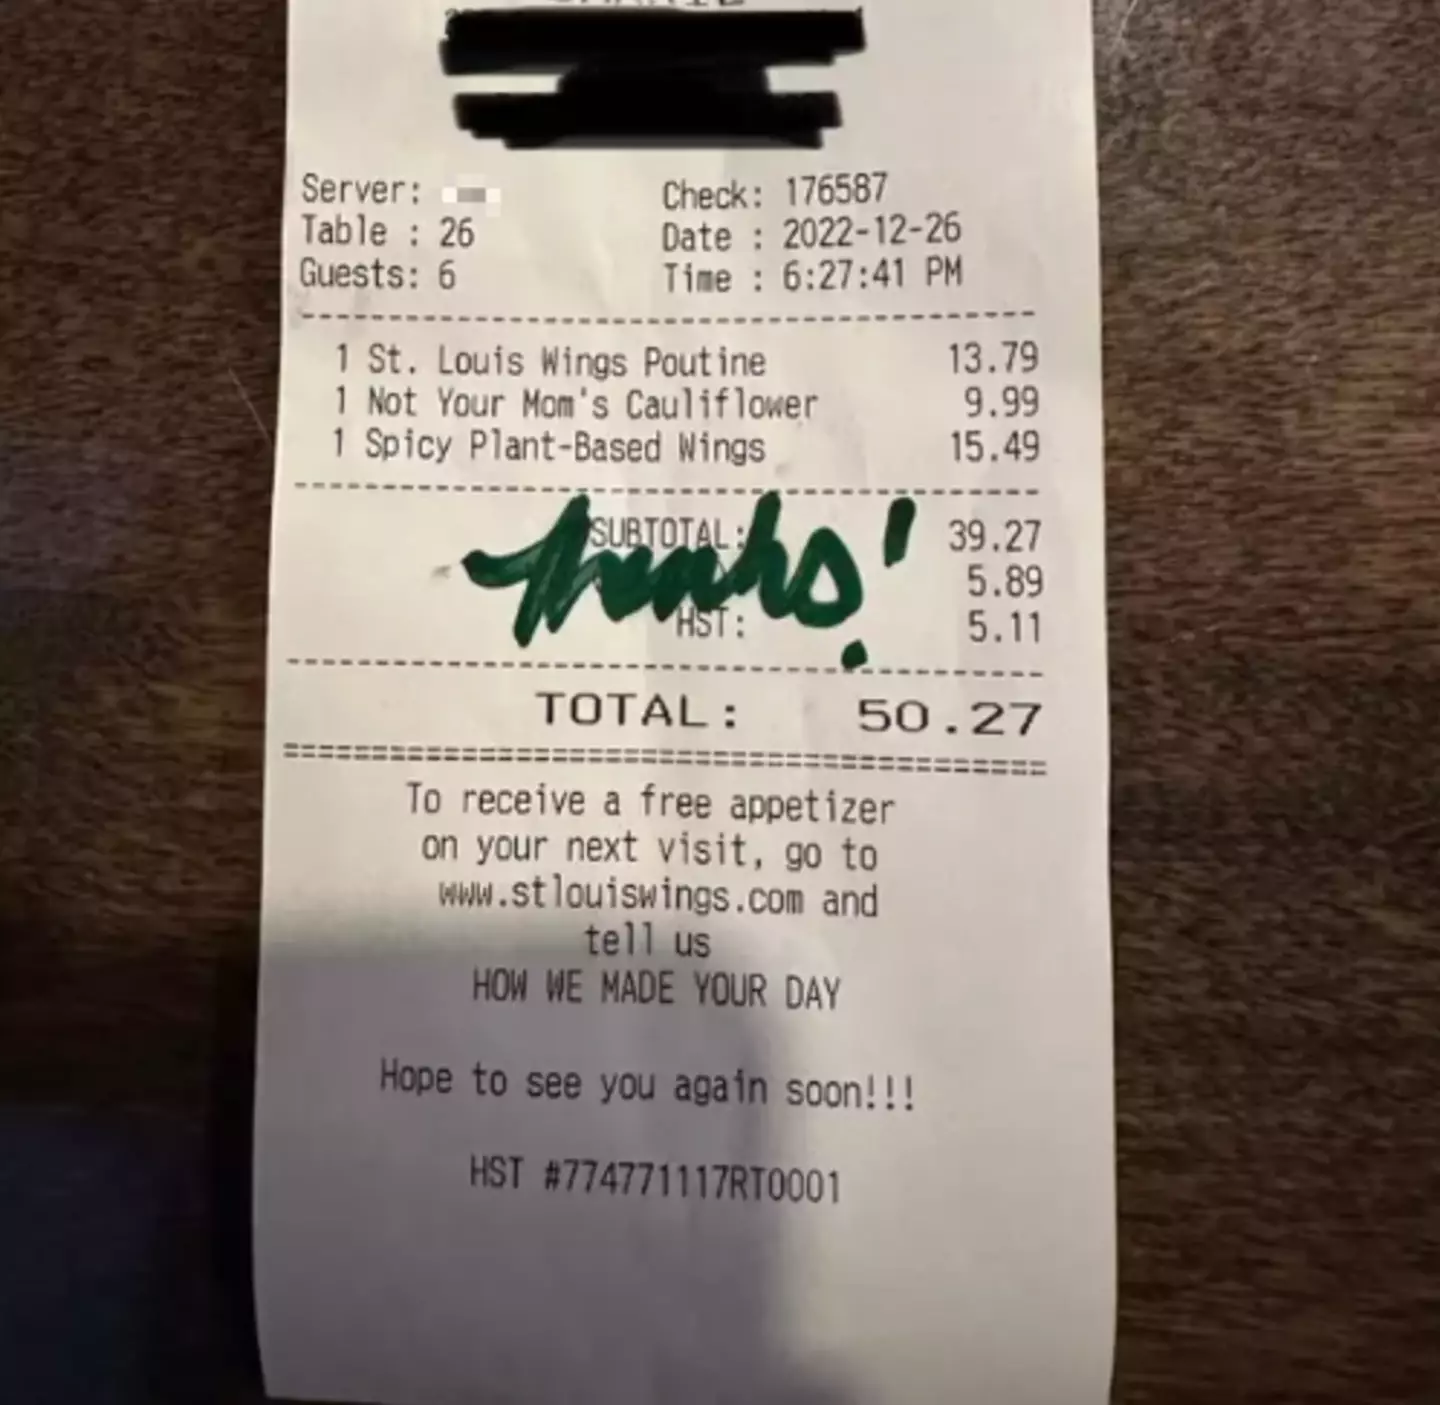 The word 'thanks' seemed to be covering part of the bill.